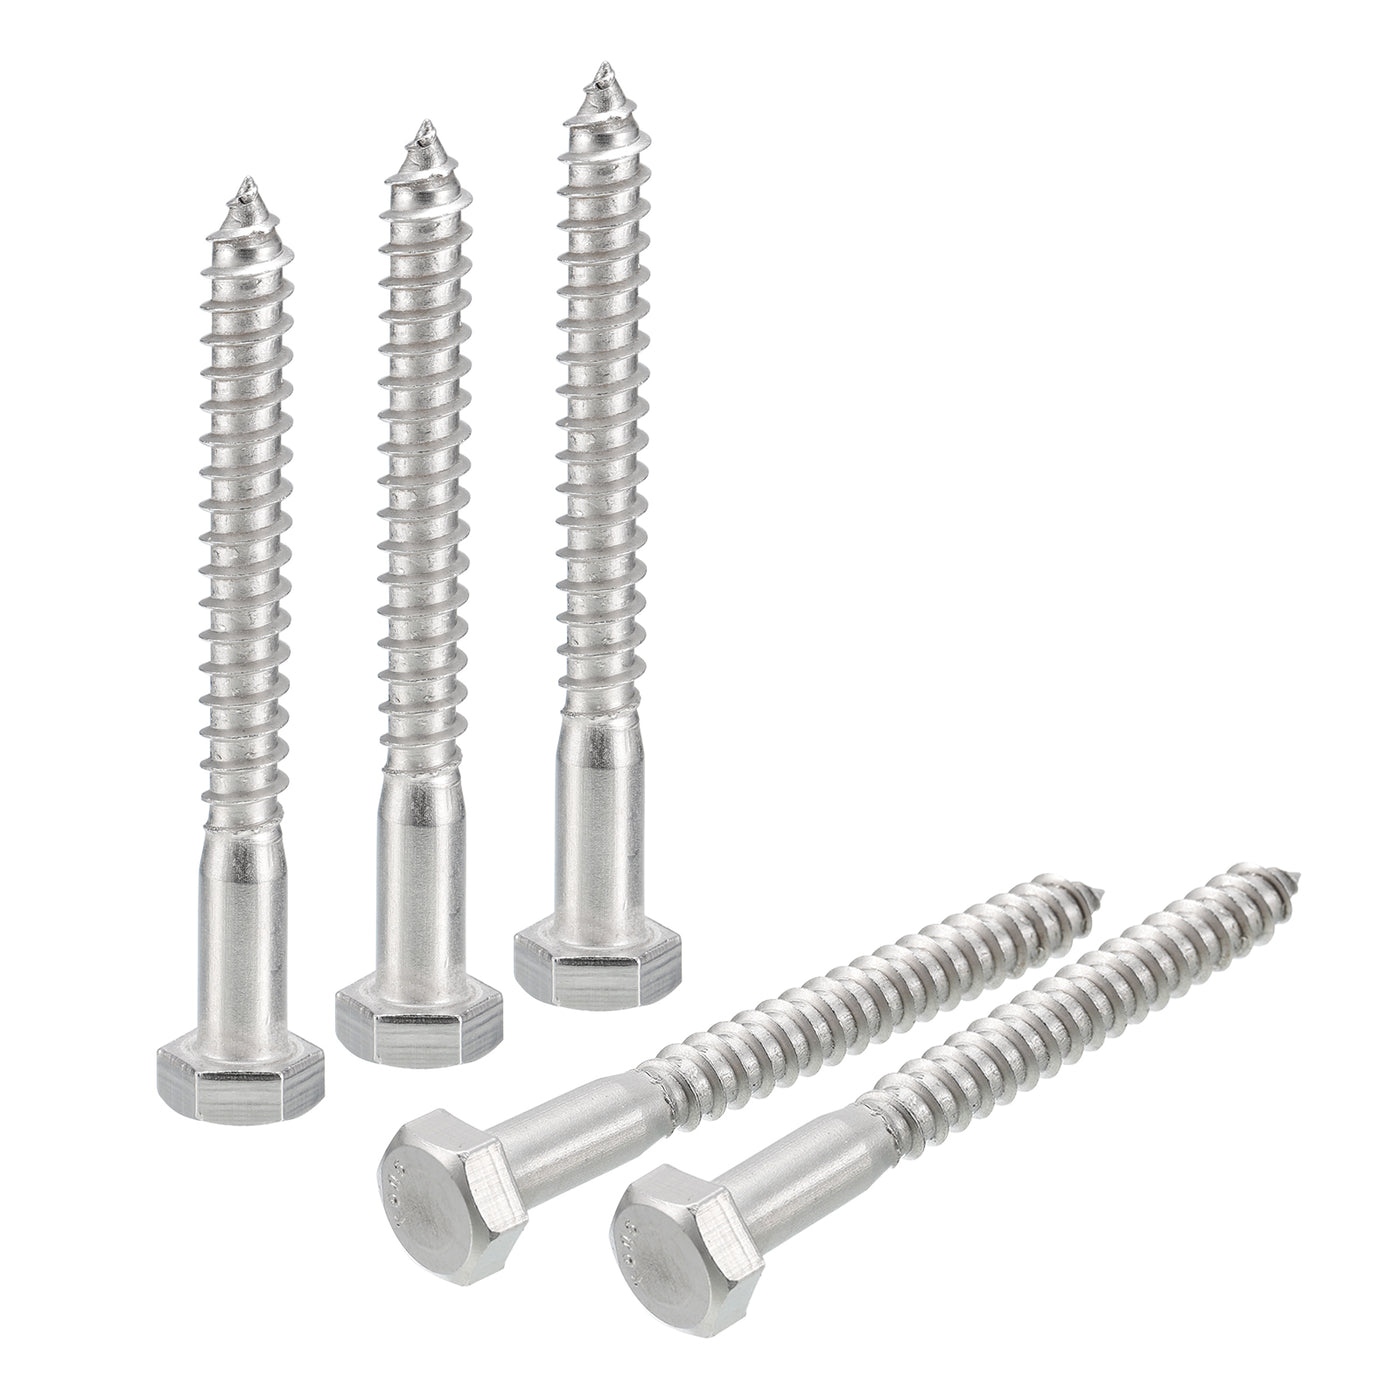 uxcell Uxcell Hex Head Lag Screws Bolts, 5pcs 5/16" x 3" 304 Stainless Steel Wood Screws